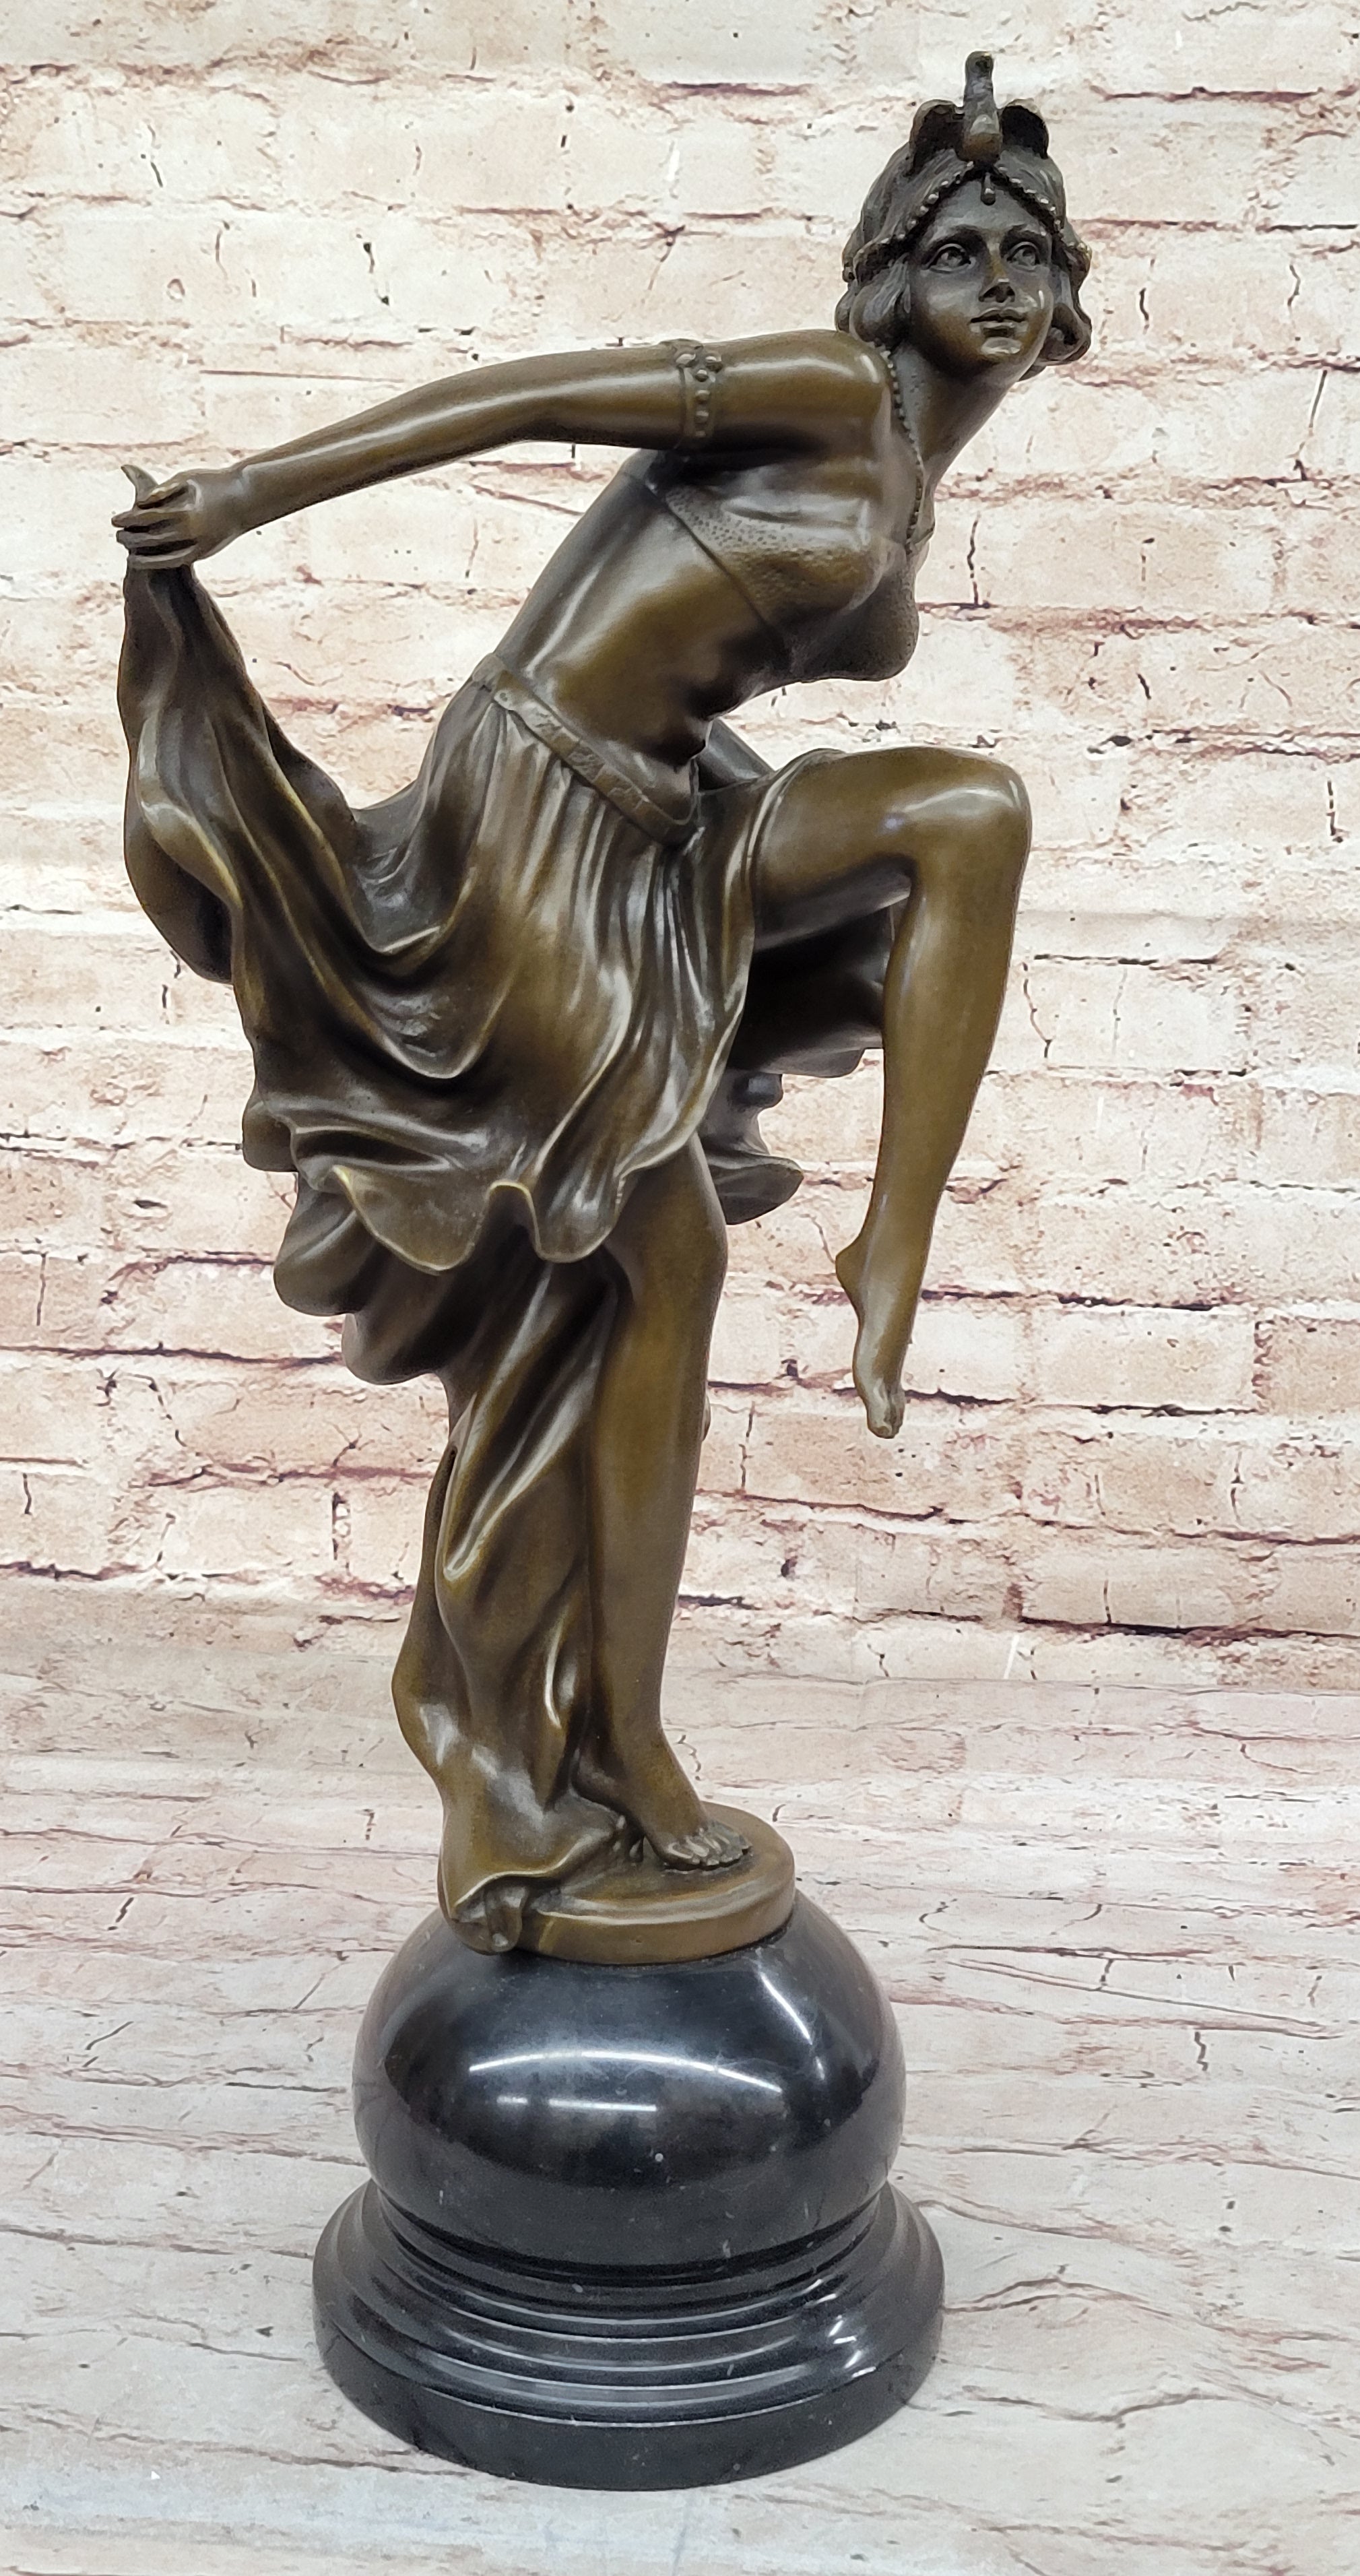 FRENCH, ART NOUVEAU LARGE BRONZE STATUE After GORY, GYPSY GIRL. HOT CAST FIGURE